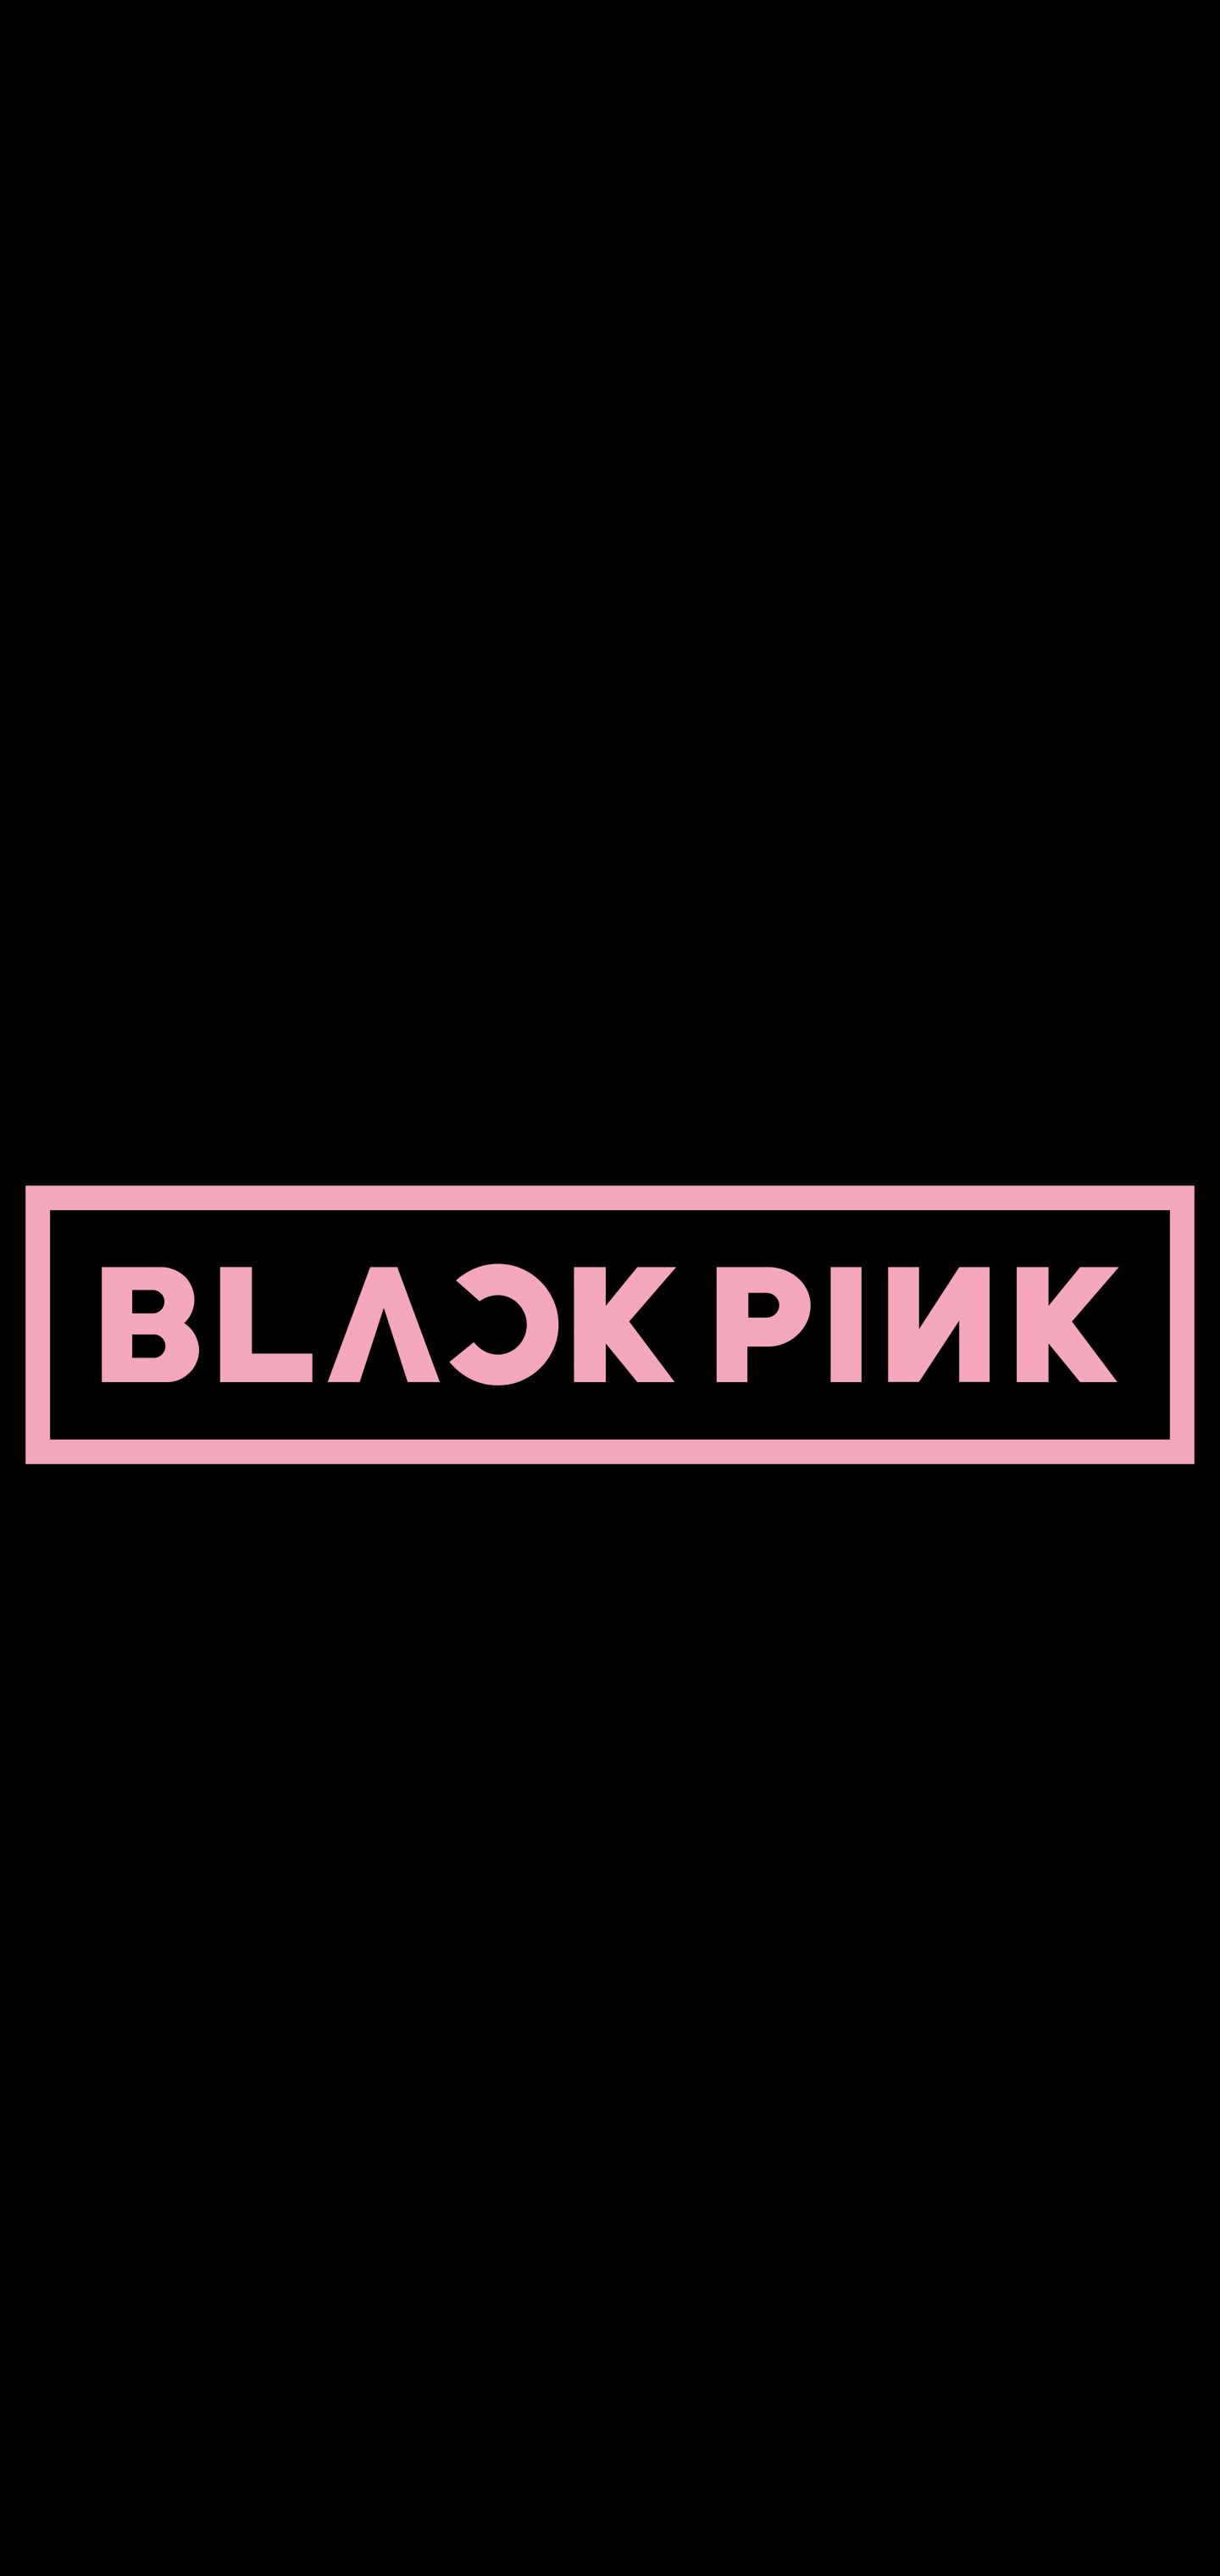 Made some very simple and minimalist Blackpink logo wallpaper. (1440x3040)